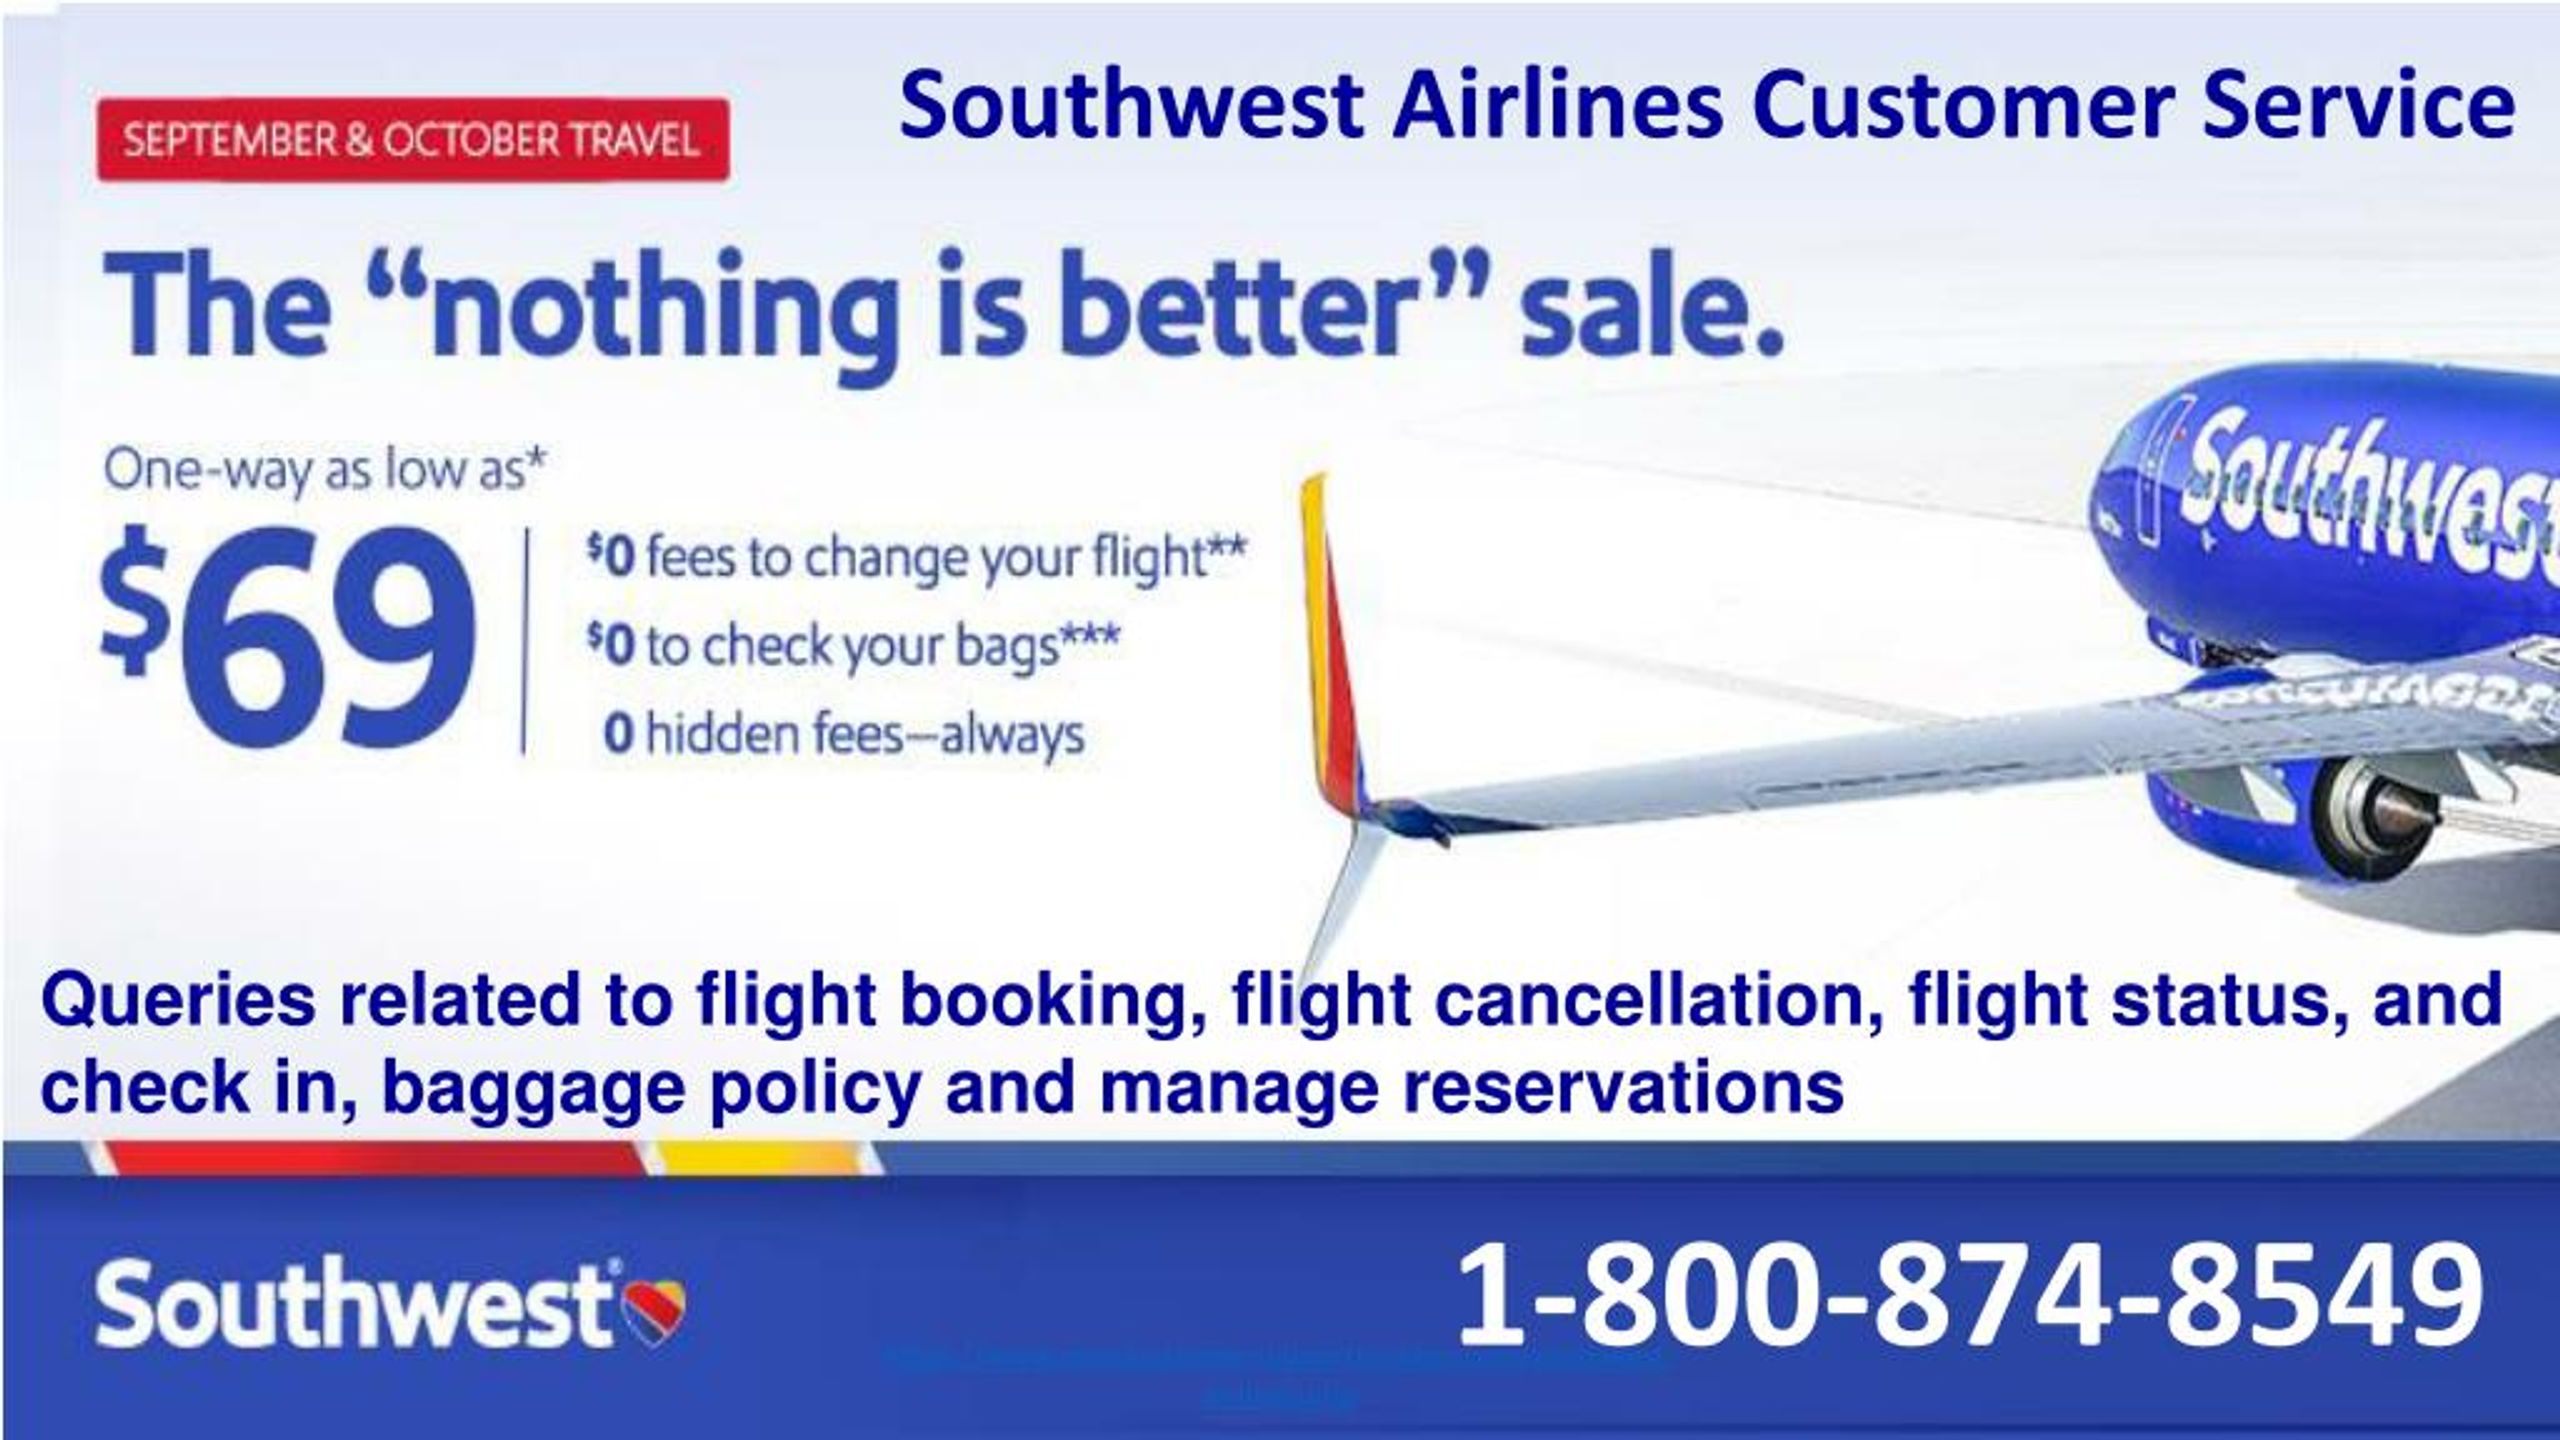 PPT - Southwest Airlines Customer Service 1-800-874-8549 for baggage allowance policy PowerPoint ...